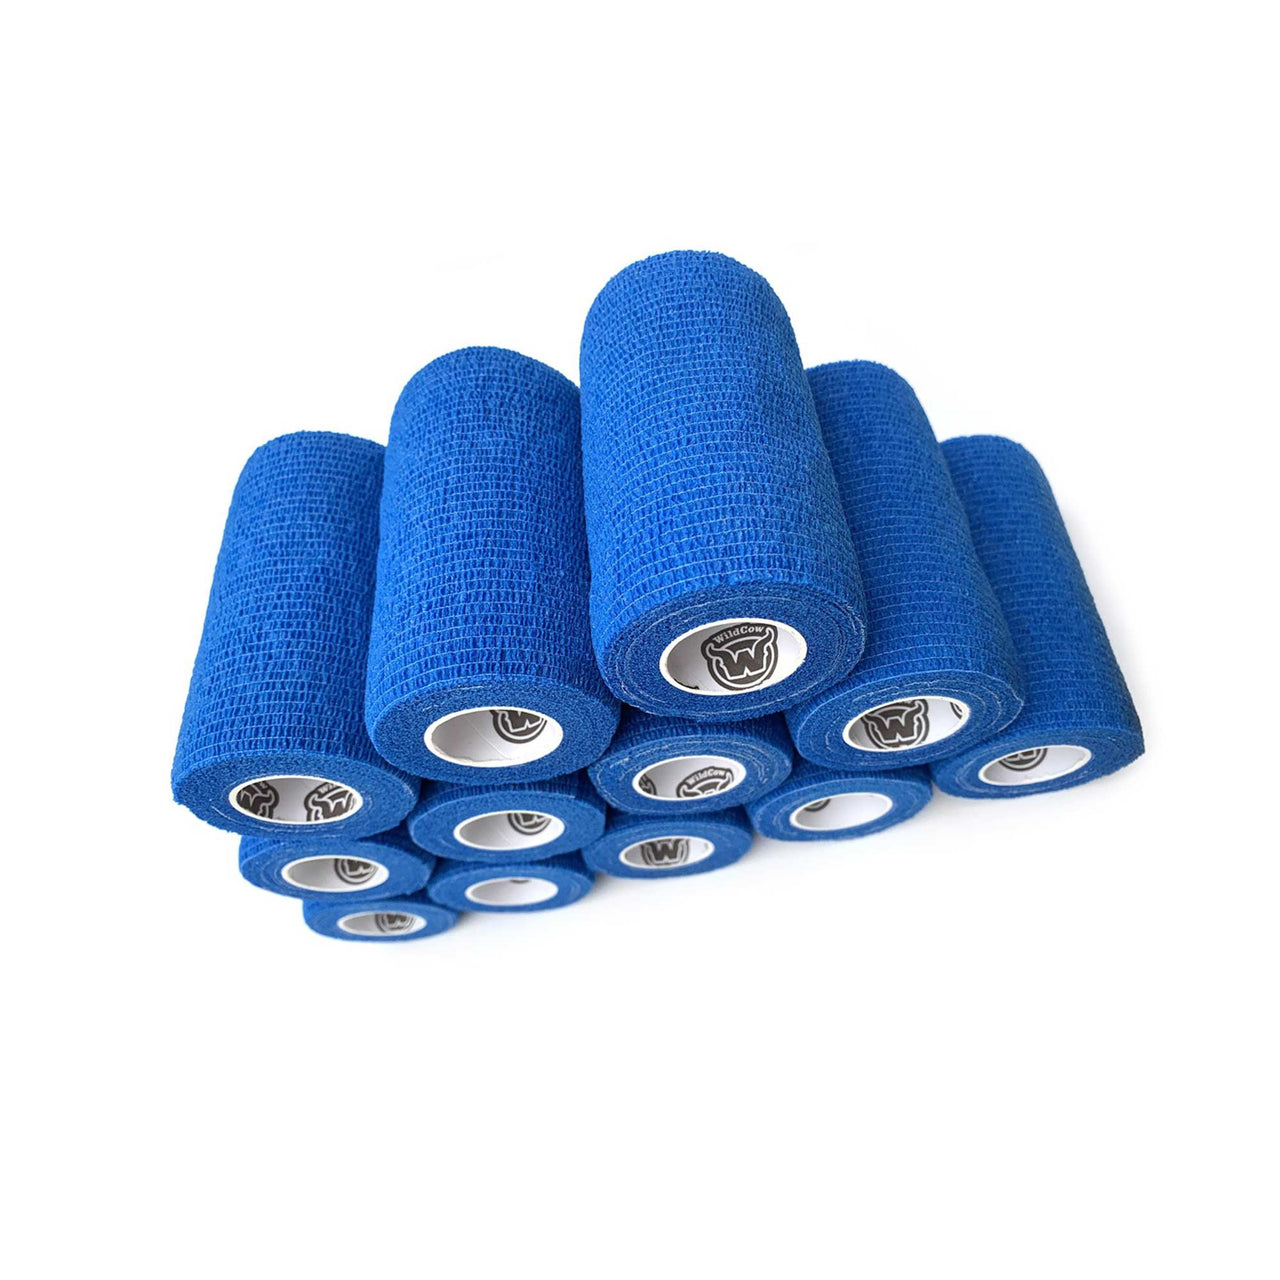 WildCow Blue Vet Wrap 12 Pack - 4 Inch